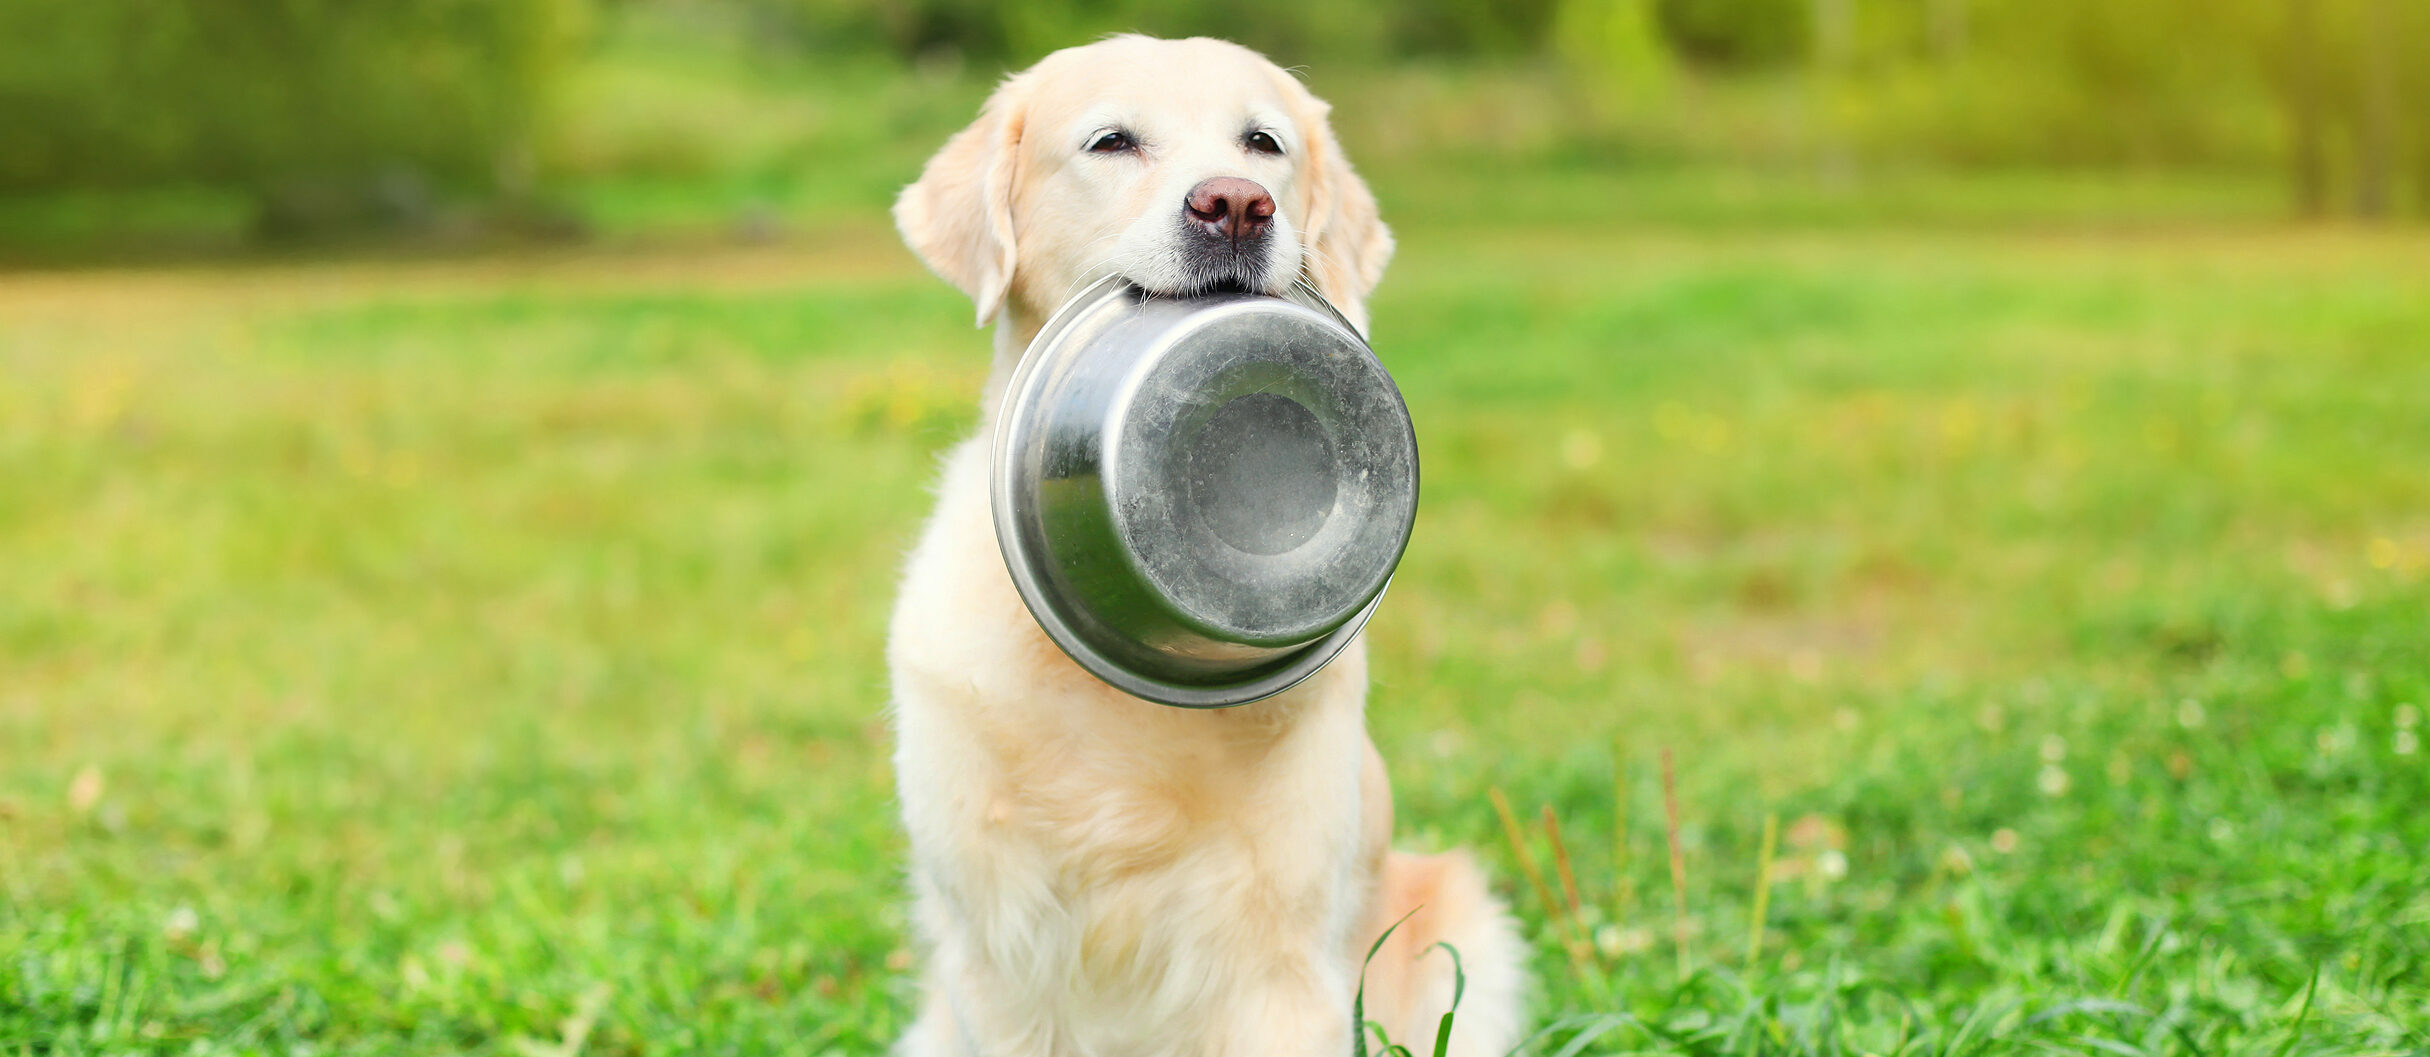 Beautiful,Golden,Retriever,Dog,Holding,In,Teeth,A,Bowl,On